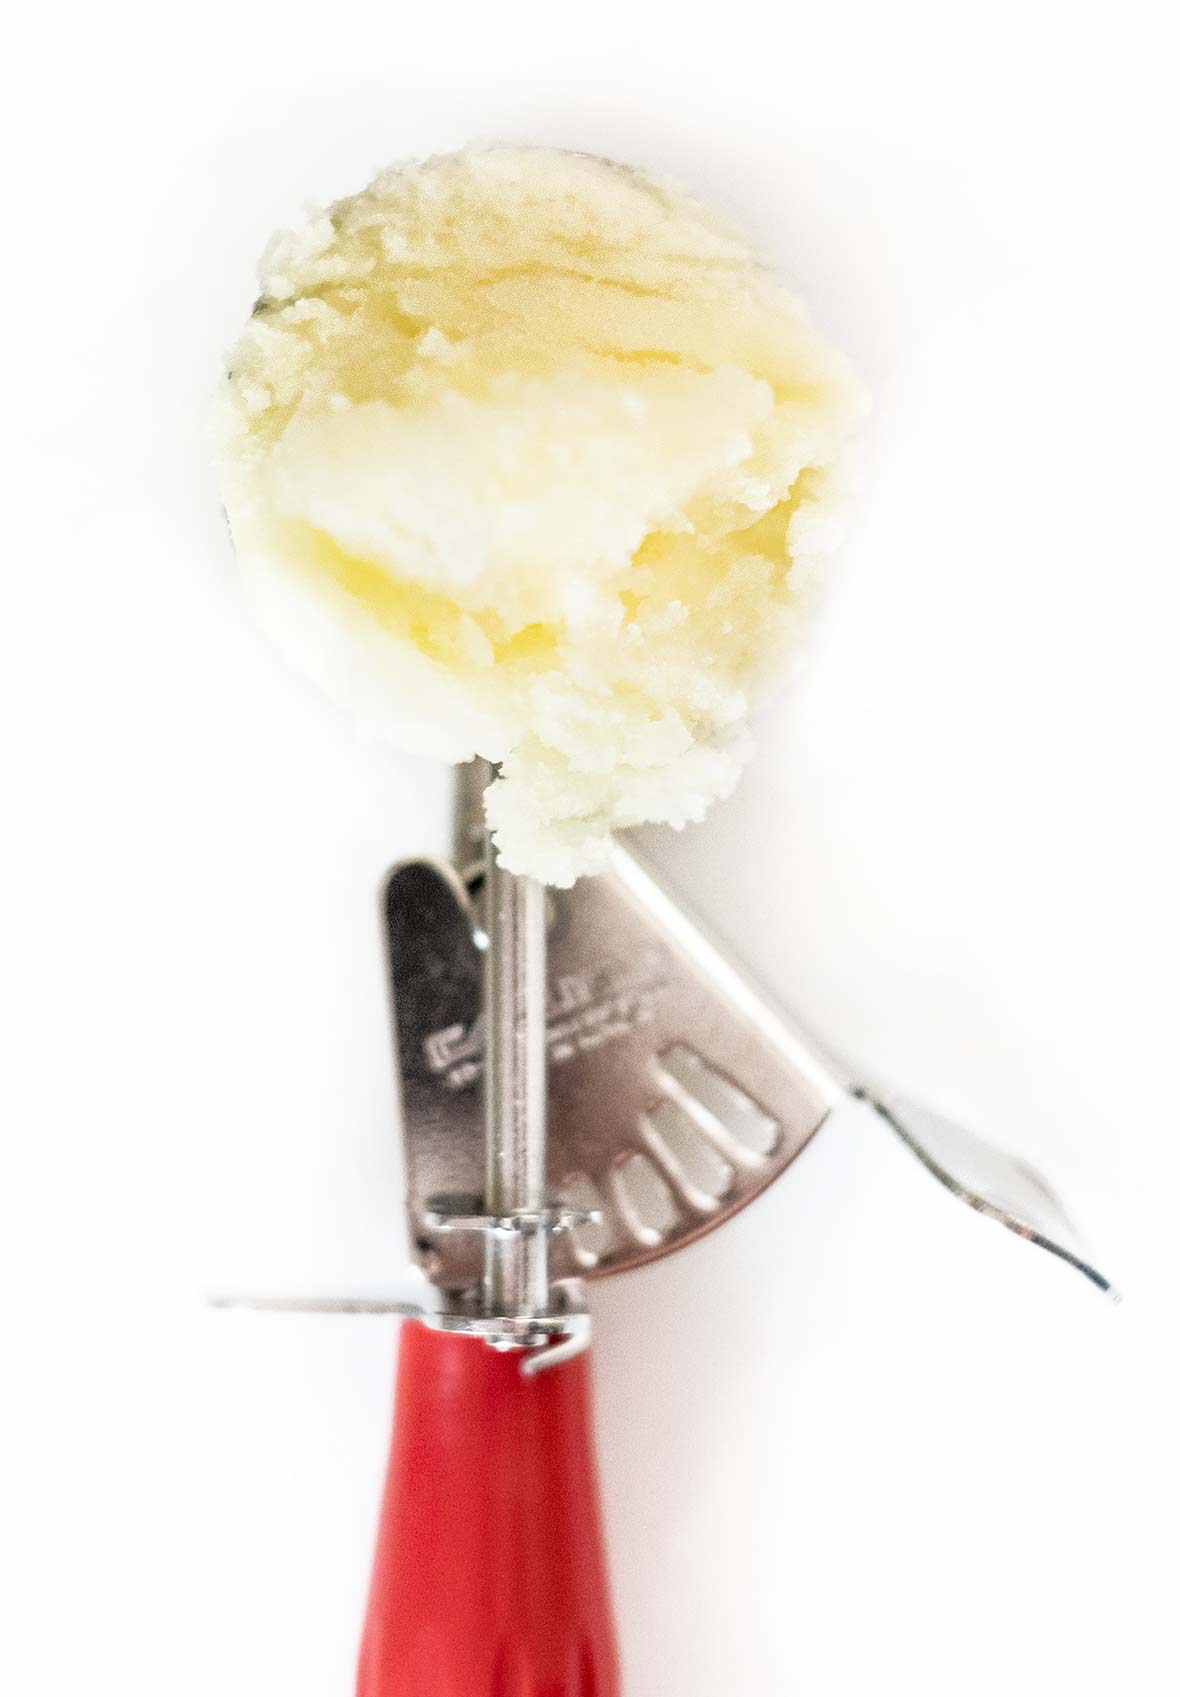 An ice cream scooper with a red handle filled with Tart Lemon Sorbet.